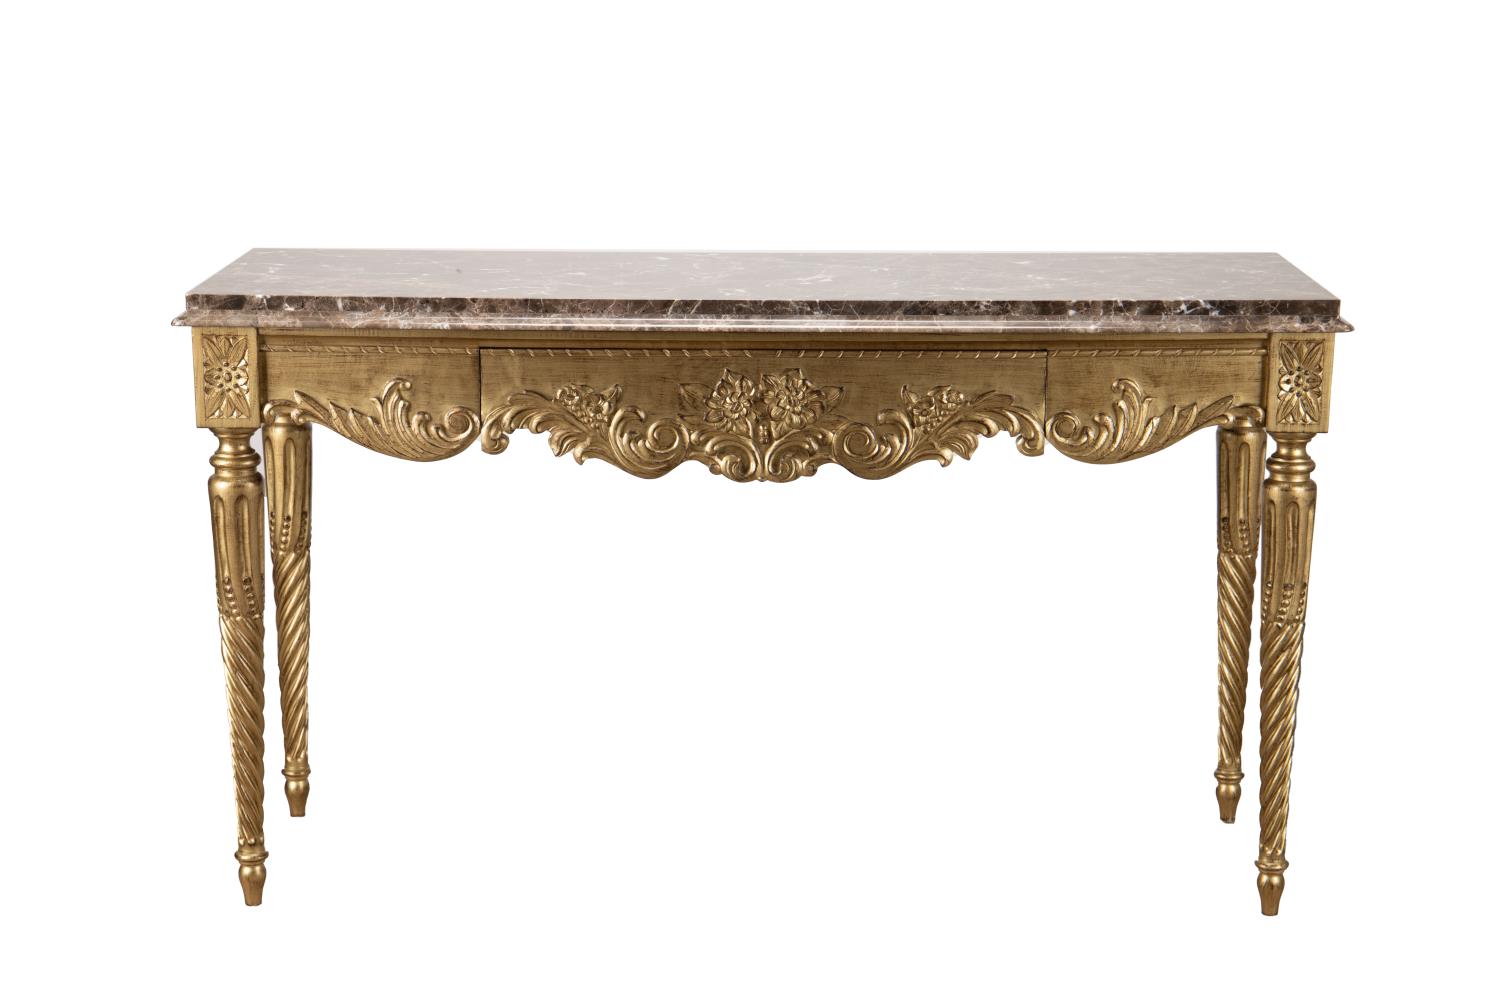 NEOCLASSICAL STYLE GILTWOOD CONSOLE